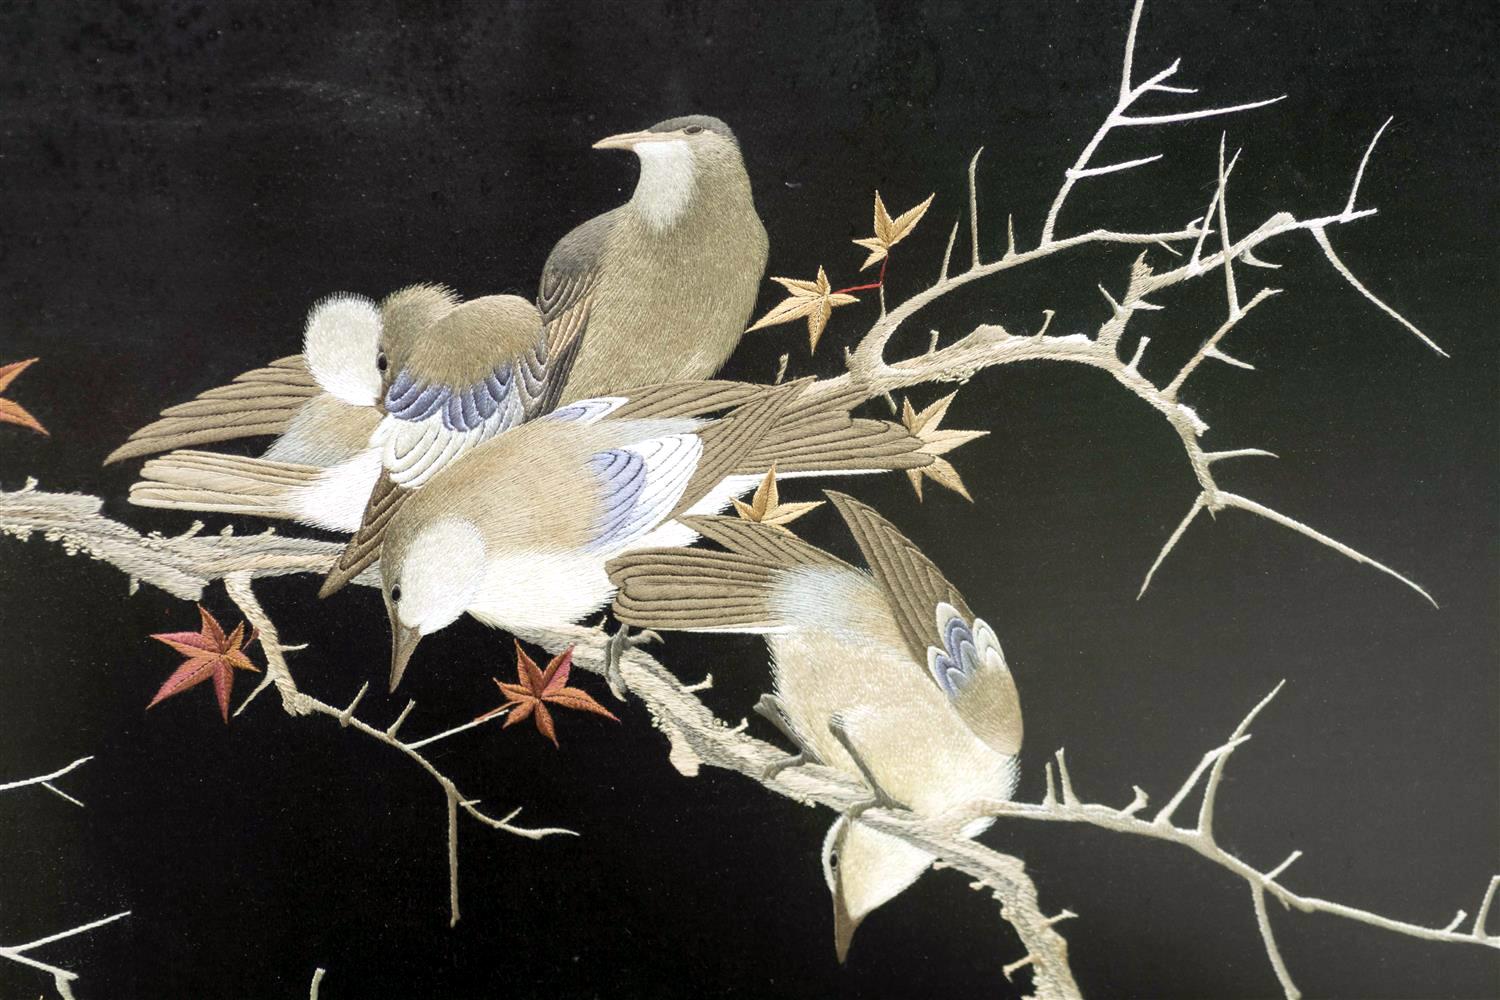 An exquisite Japanese embroidery piece circa end of 19th century-early 20th century of Meiji period. The poetic composition of three birds perched on the branches of the maples in deep autumn, evokes a strong sense of seasonal beauty that is